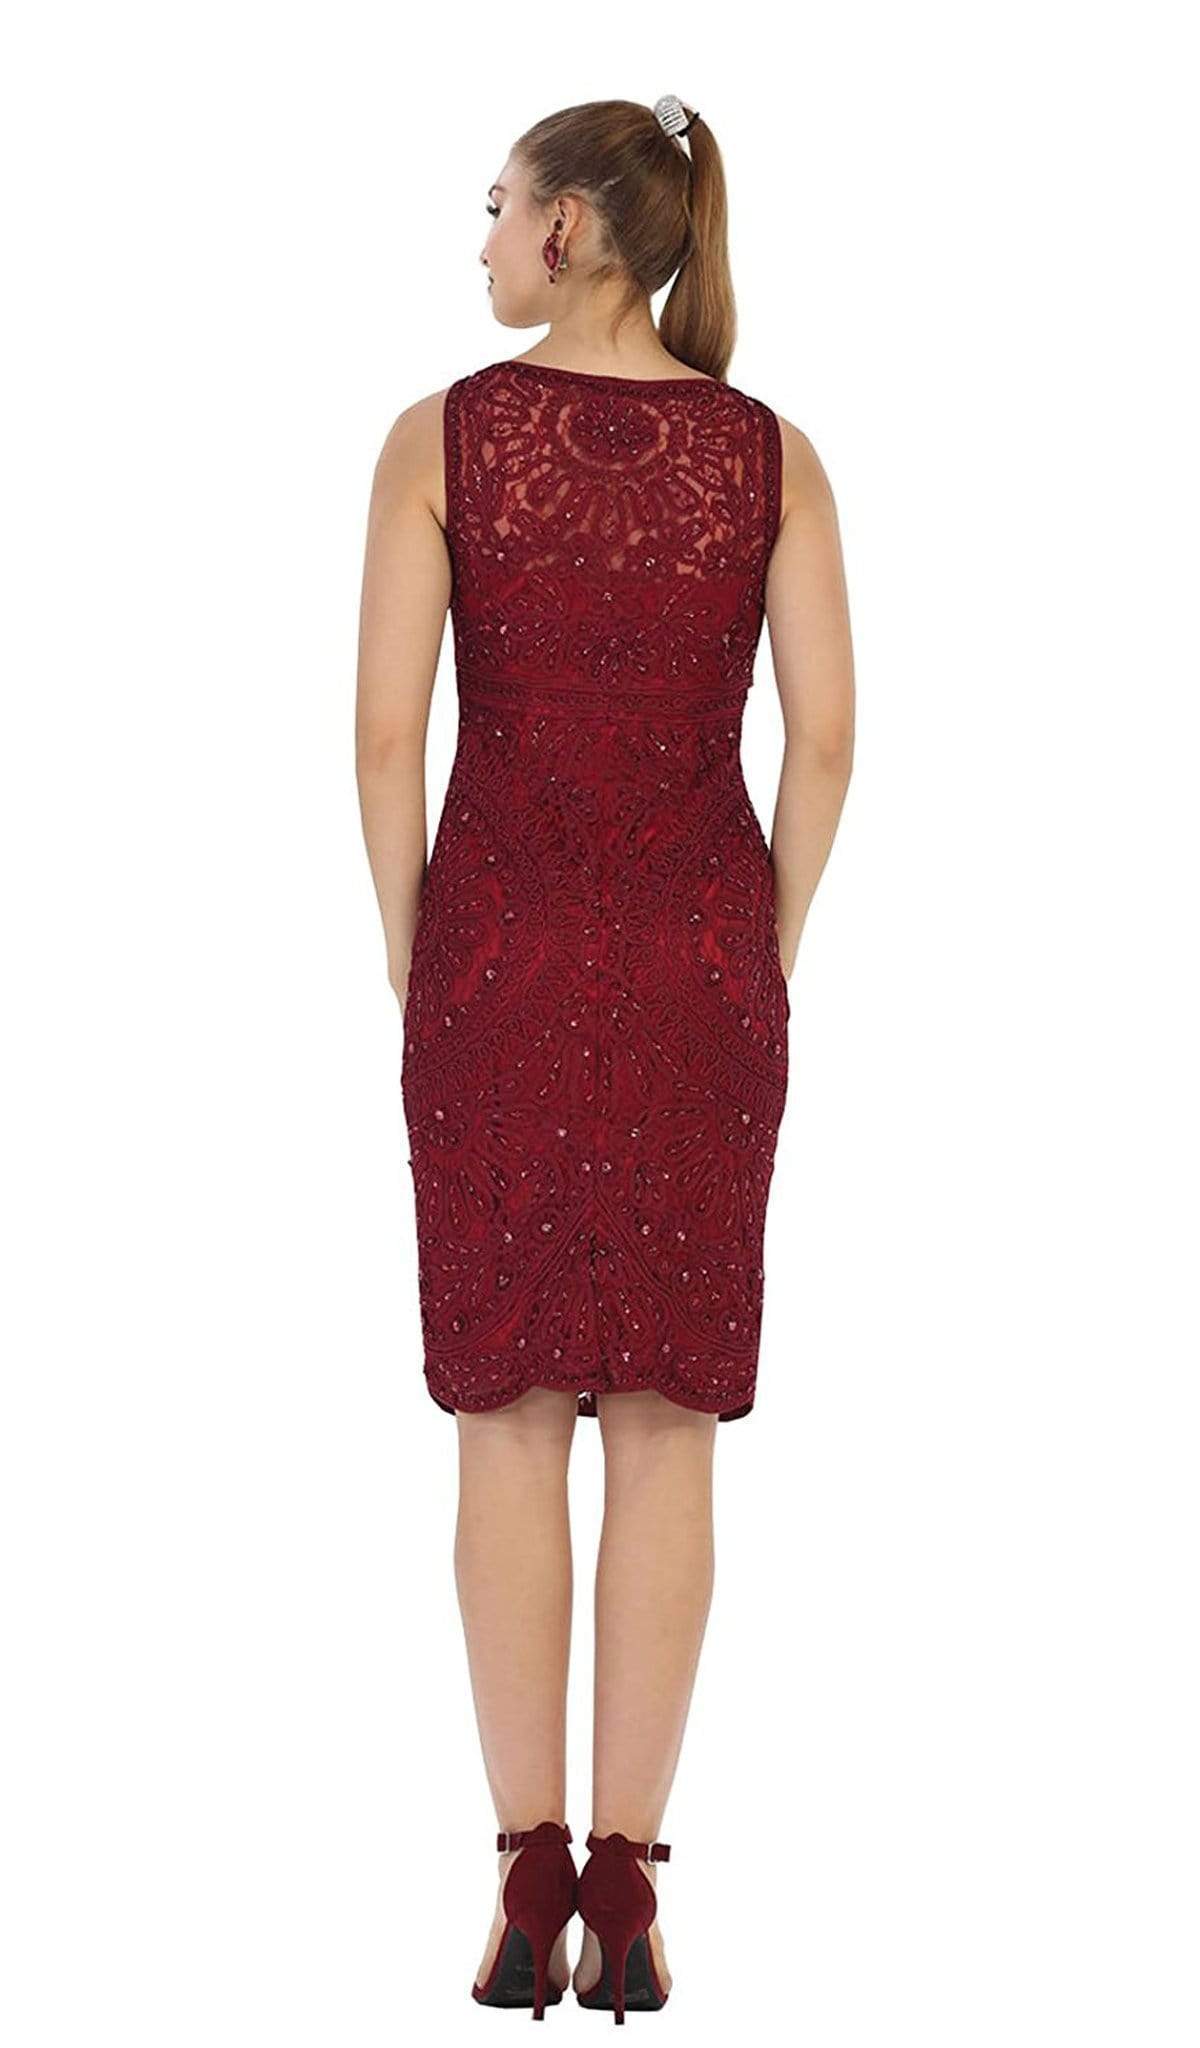 May Queen - Knee Length Embroidered V-Neck Cocktail Dress Special Occasion Dress